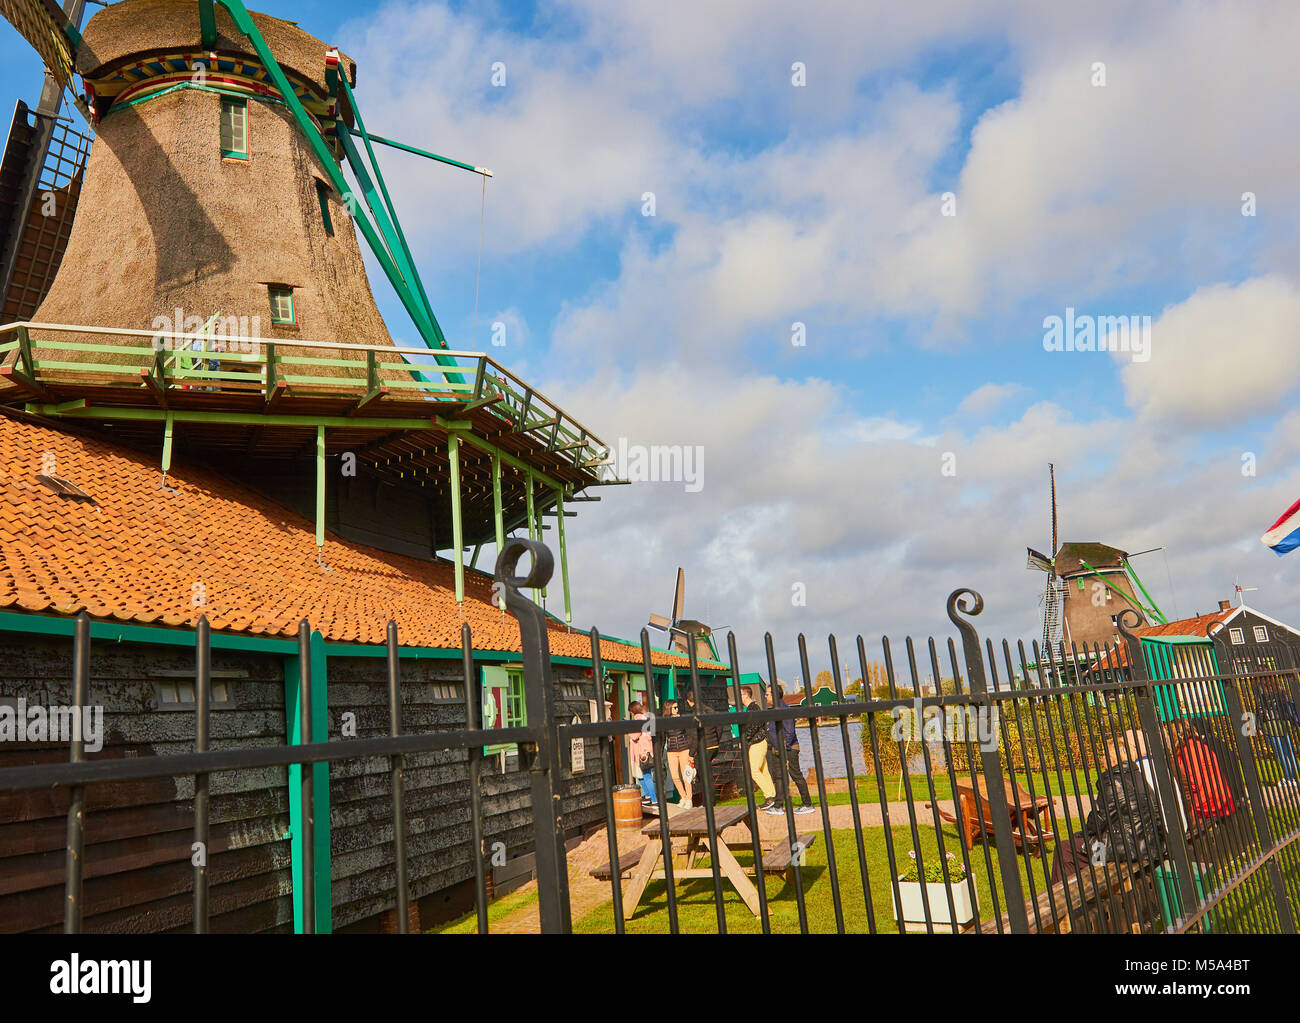 De Kat, a colour mill which harnesses the power of the wind to grind a variety of natural dyes and pigments, Zaanse Schans, North Holland, Netherlands Stock Photo